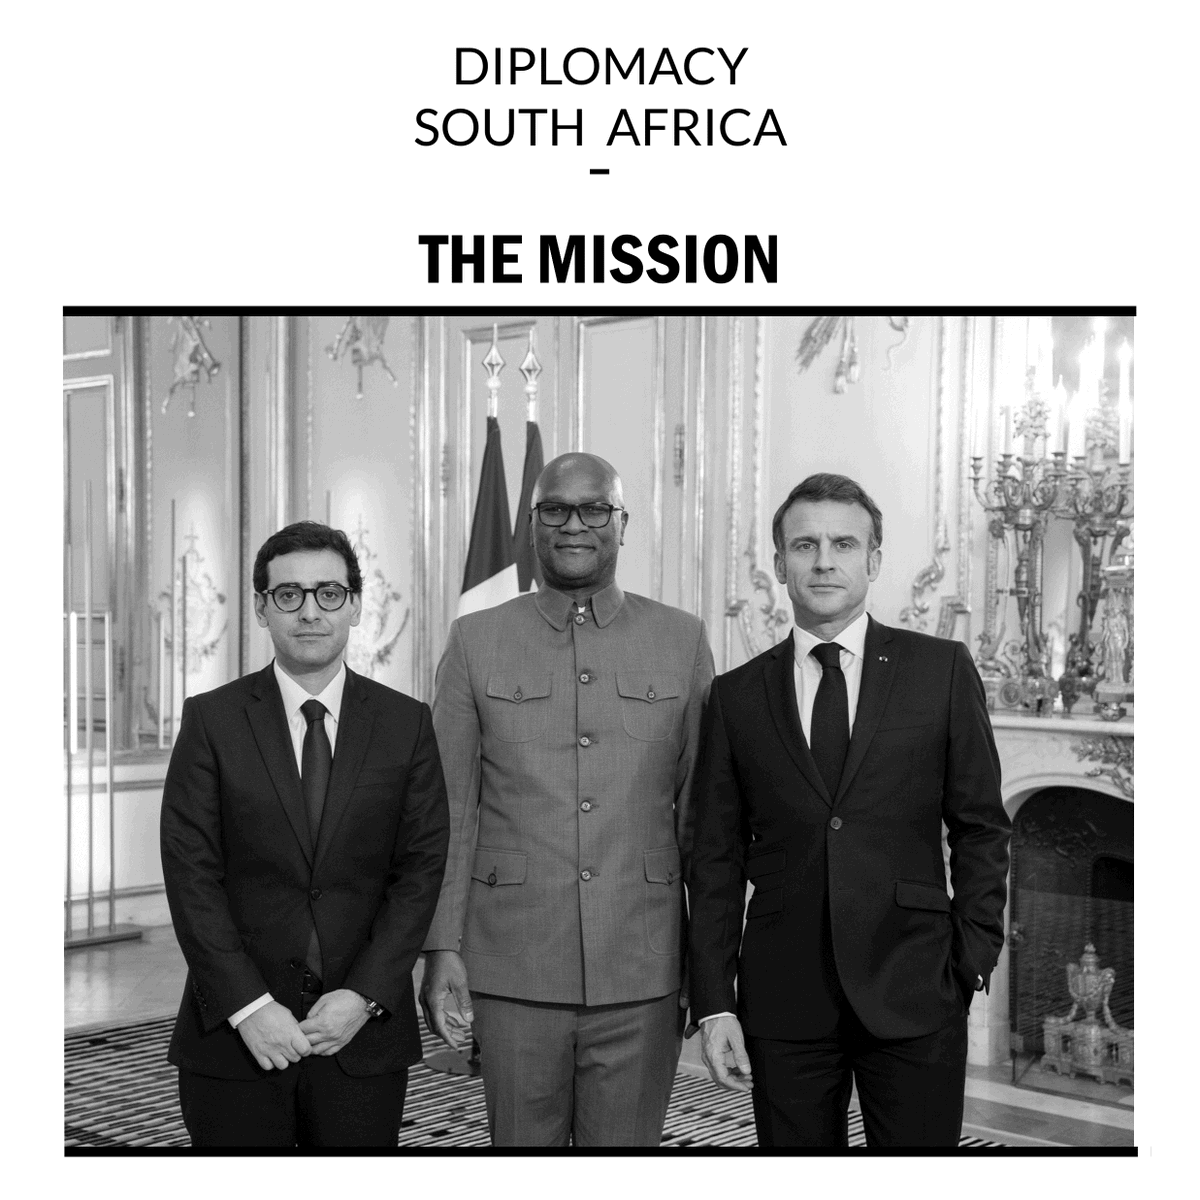 The Mission 🇿🇦 🇫🇷 Embassy of South Africa in France @RSAinFrance @NathiMthethwaSA